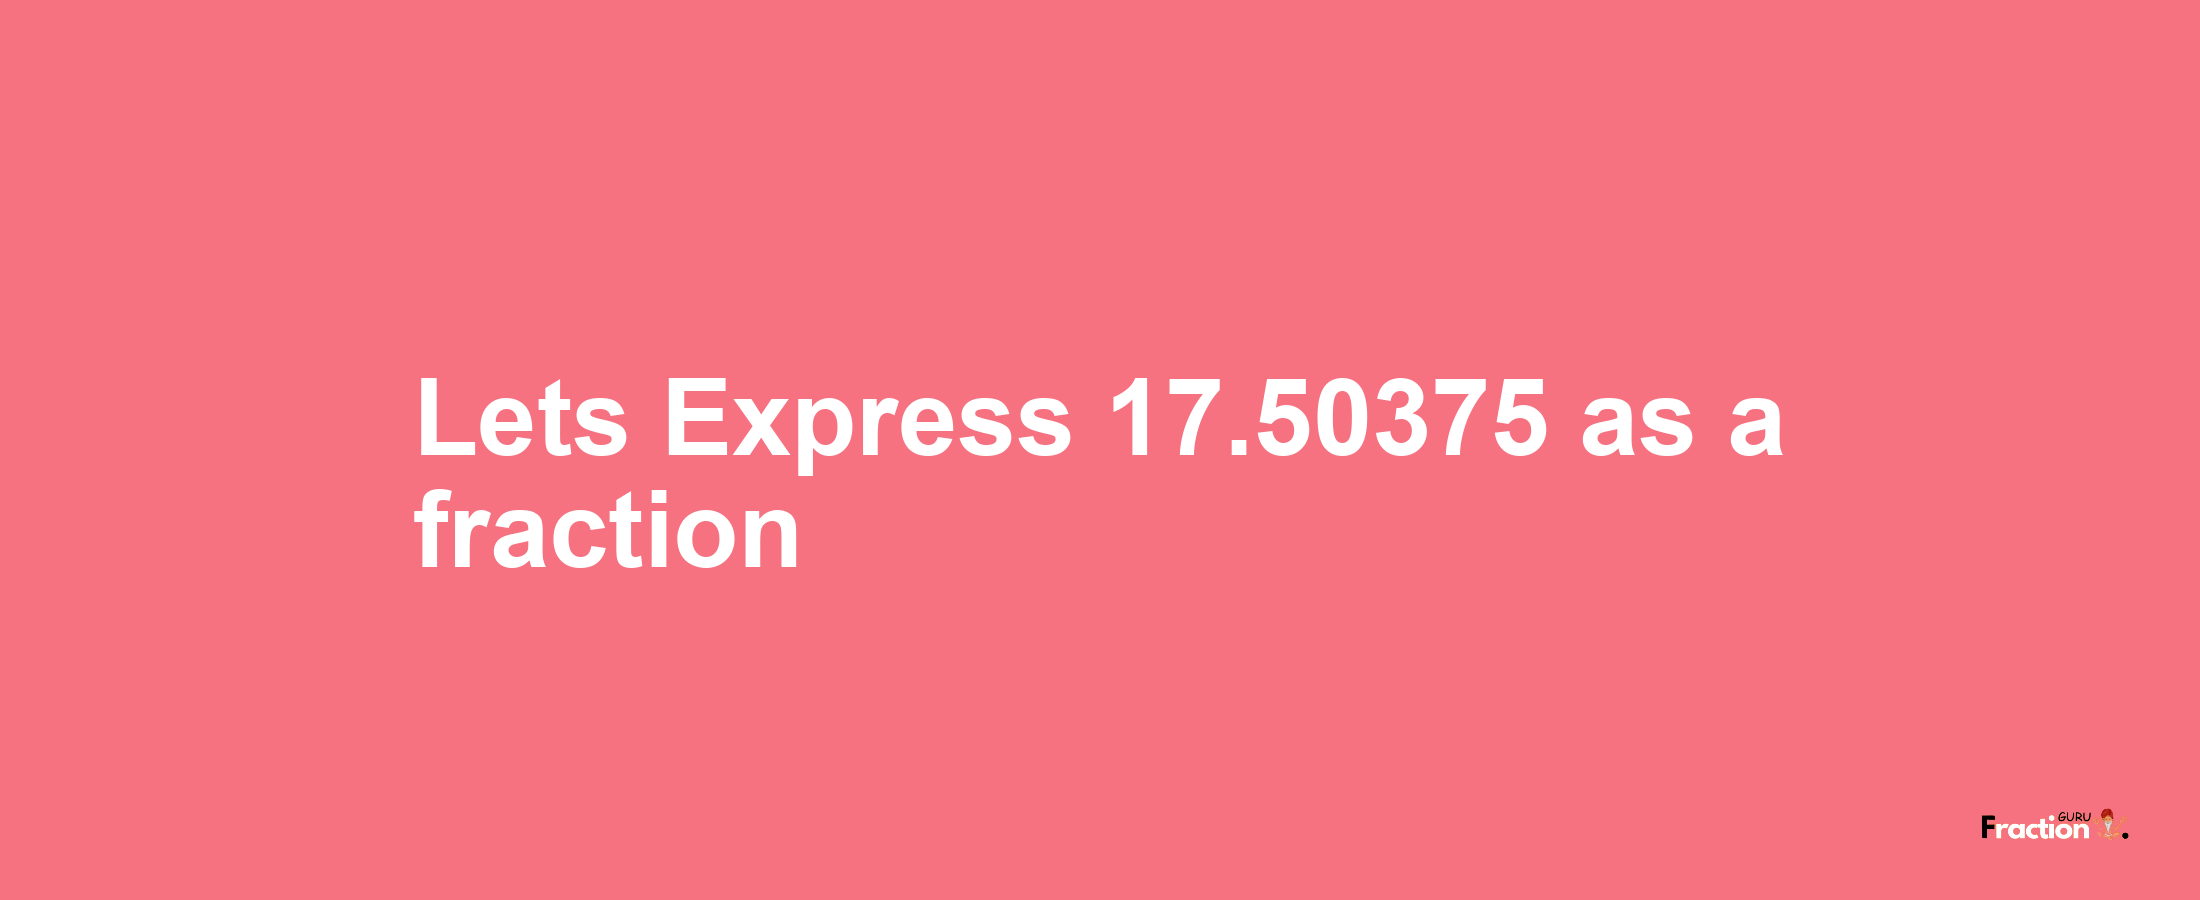 Lets Express 17.50375 as afraction